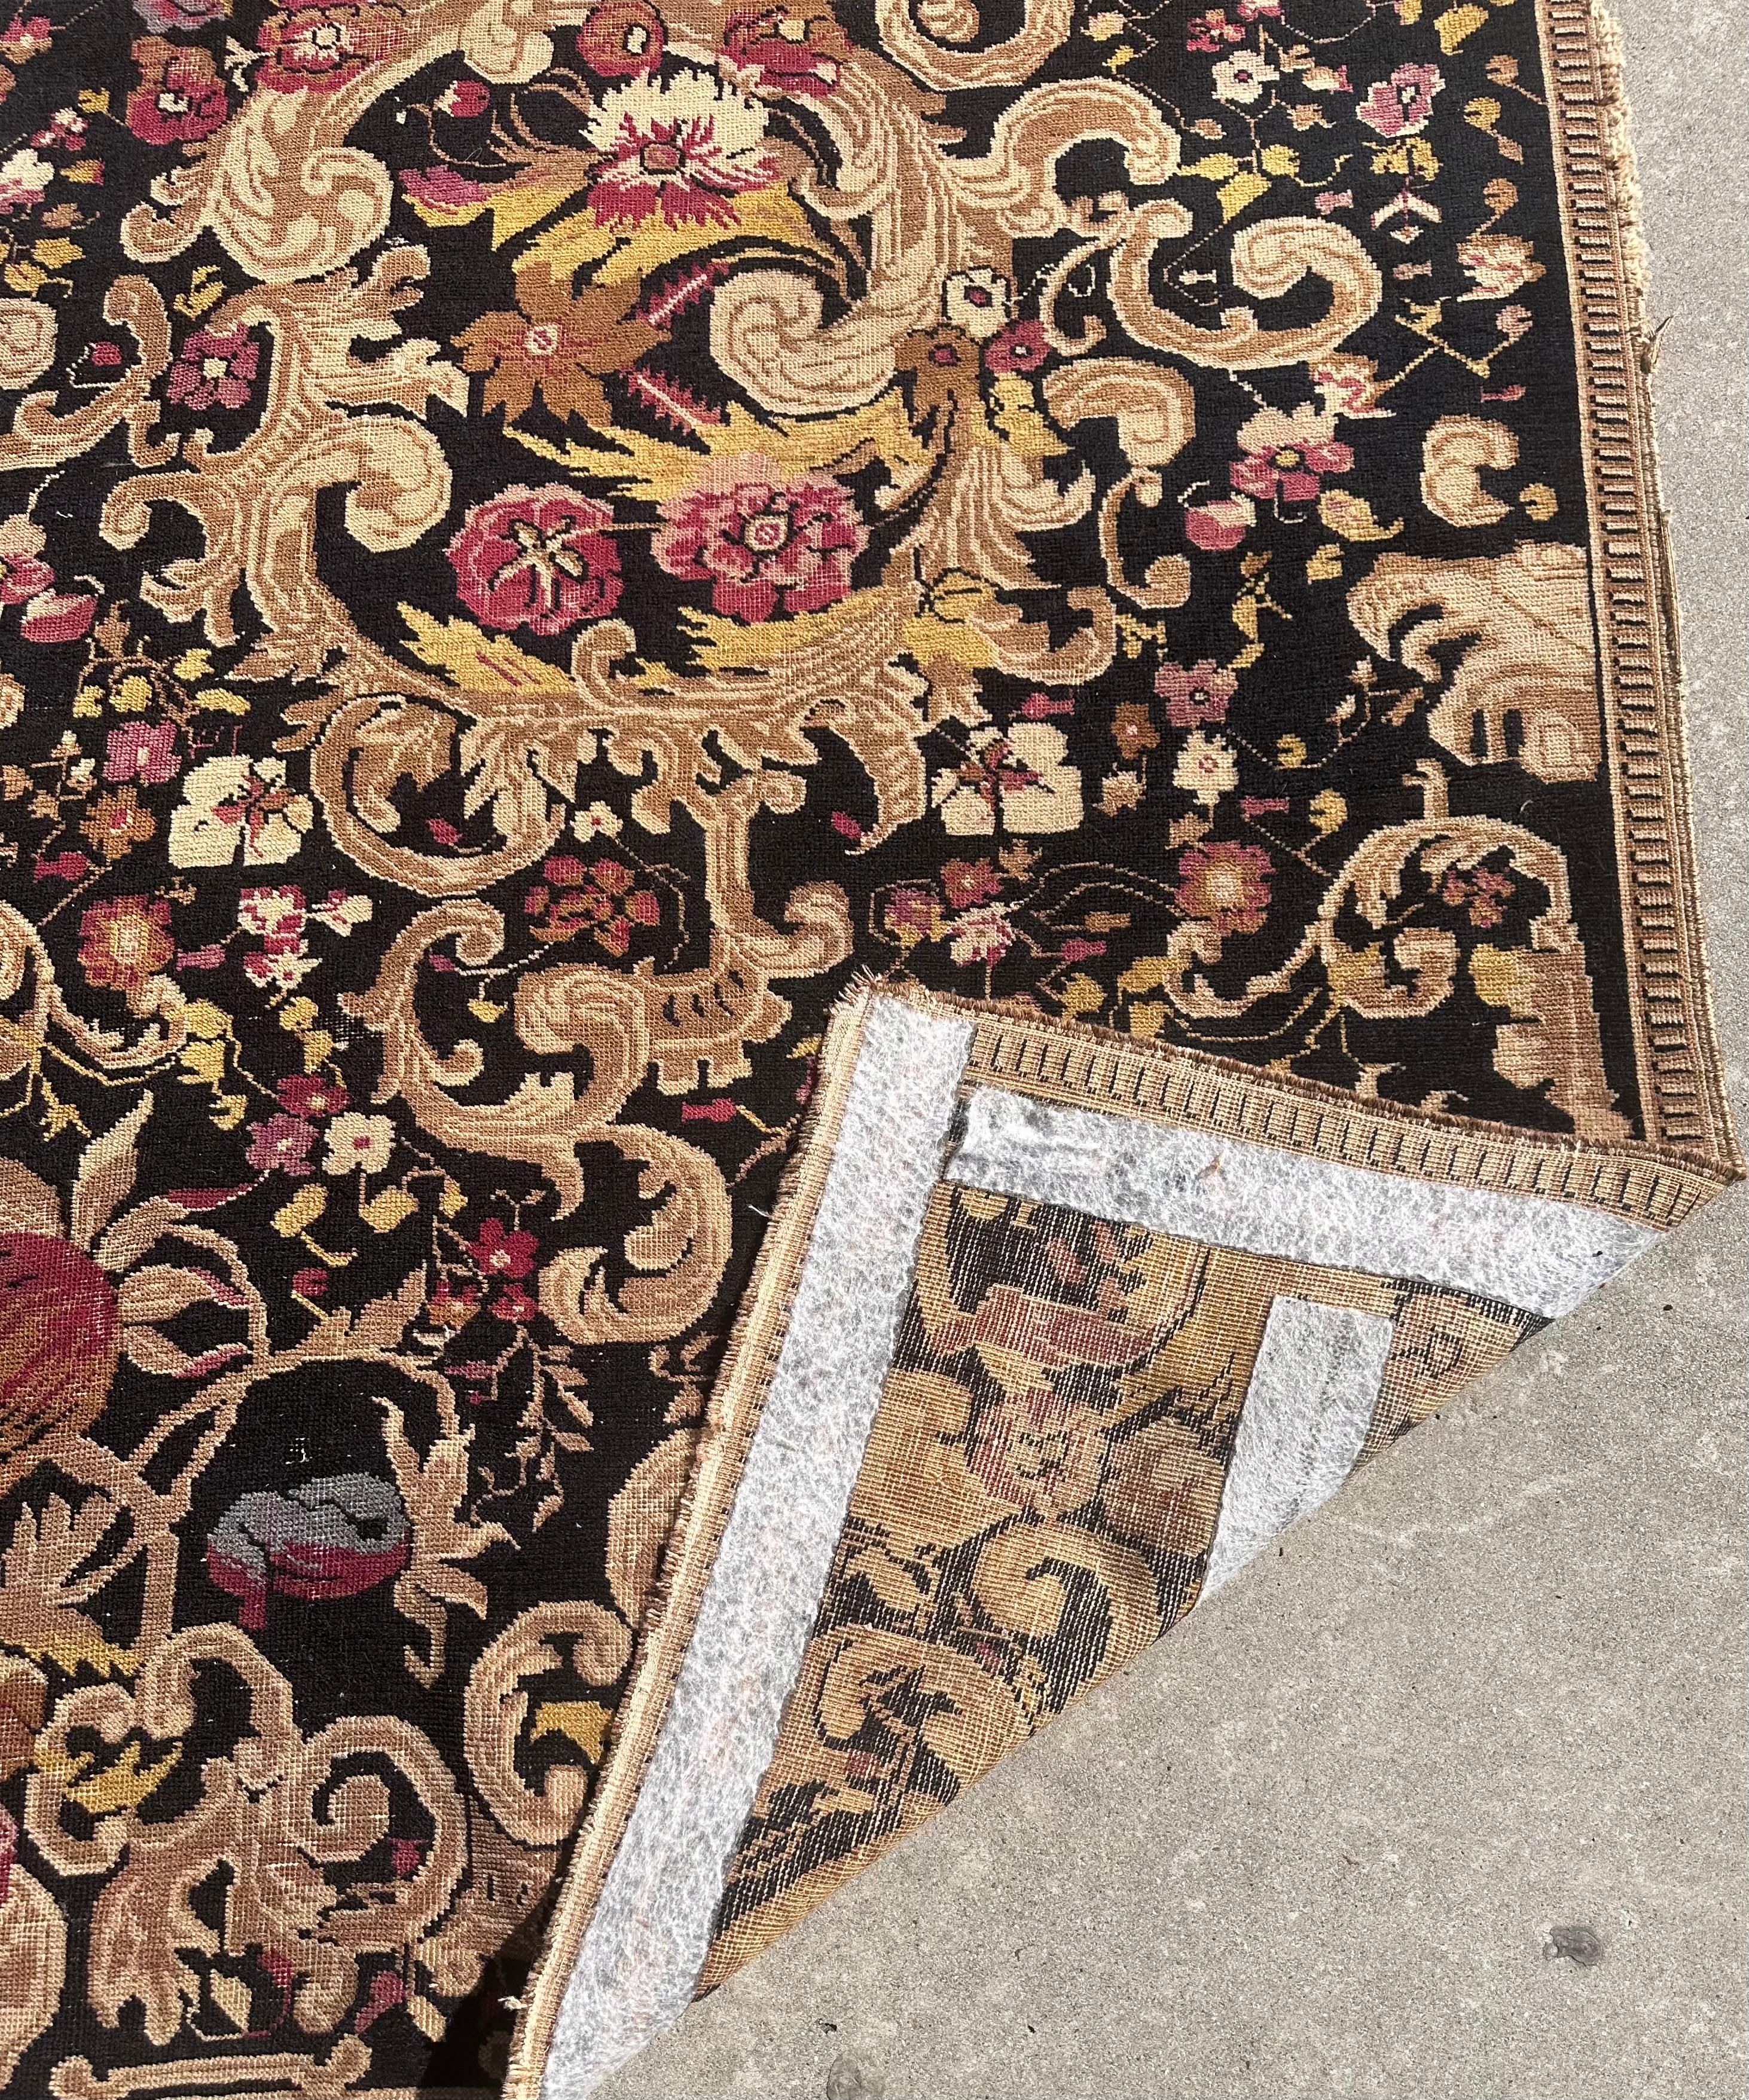 Caucasian 19th Century Karabagh Runner Inspired With Floral Design For Sale